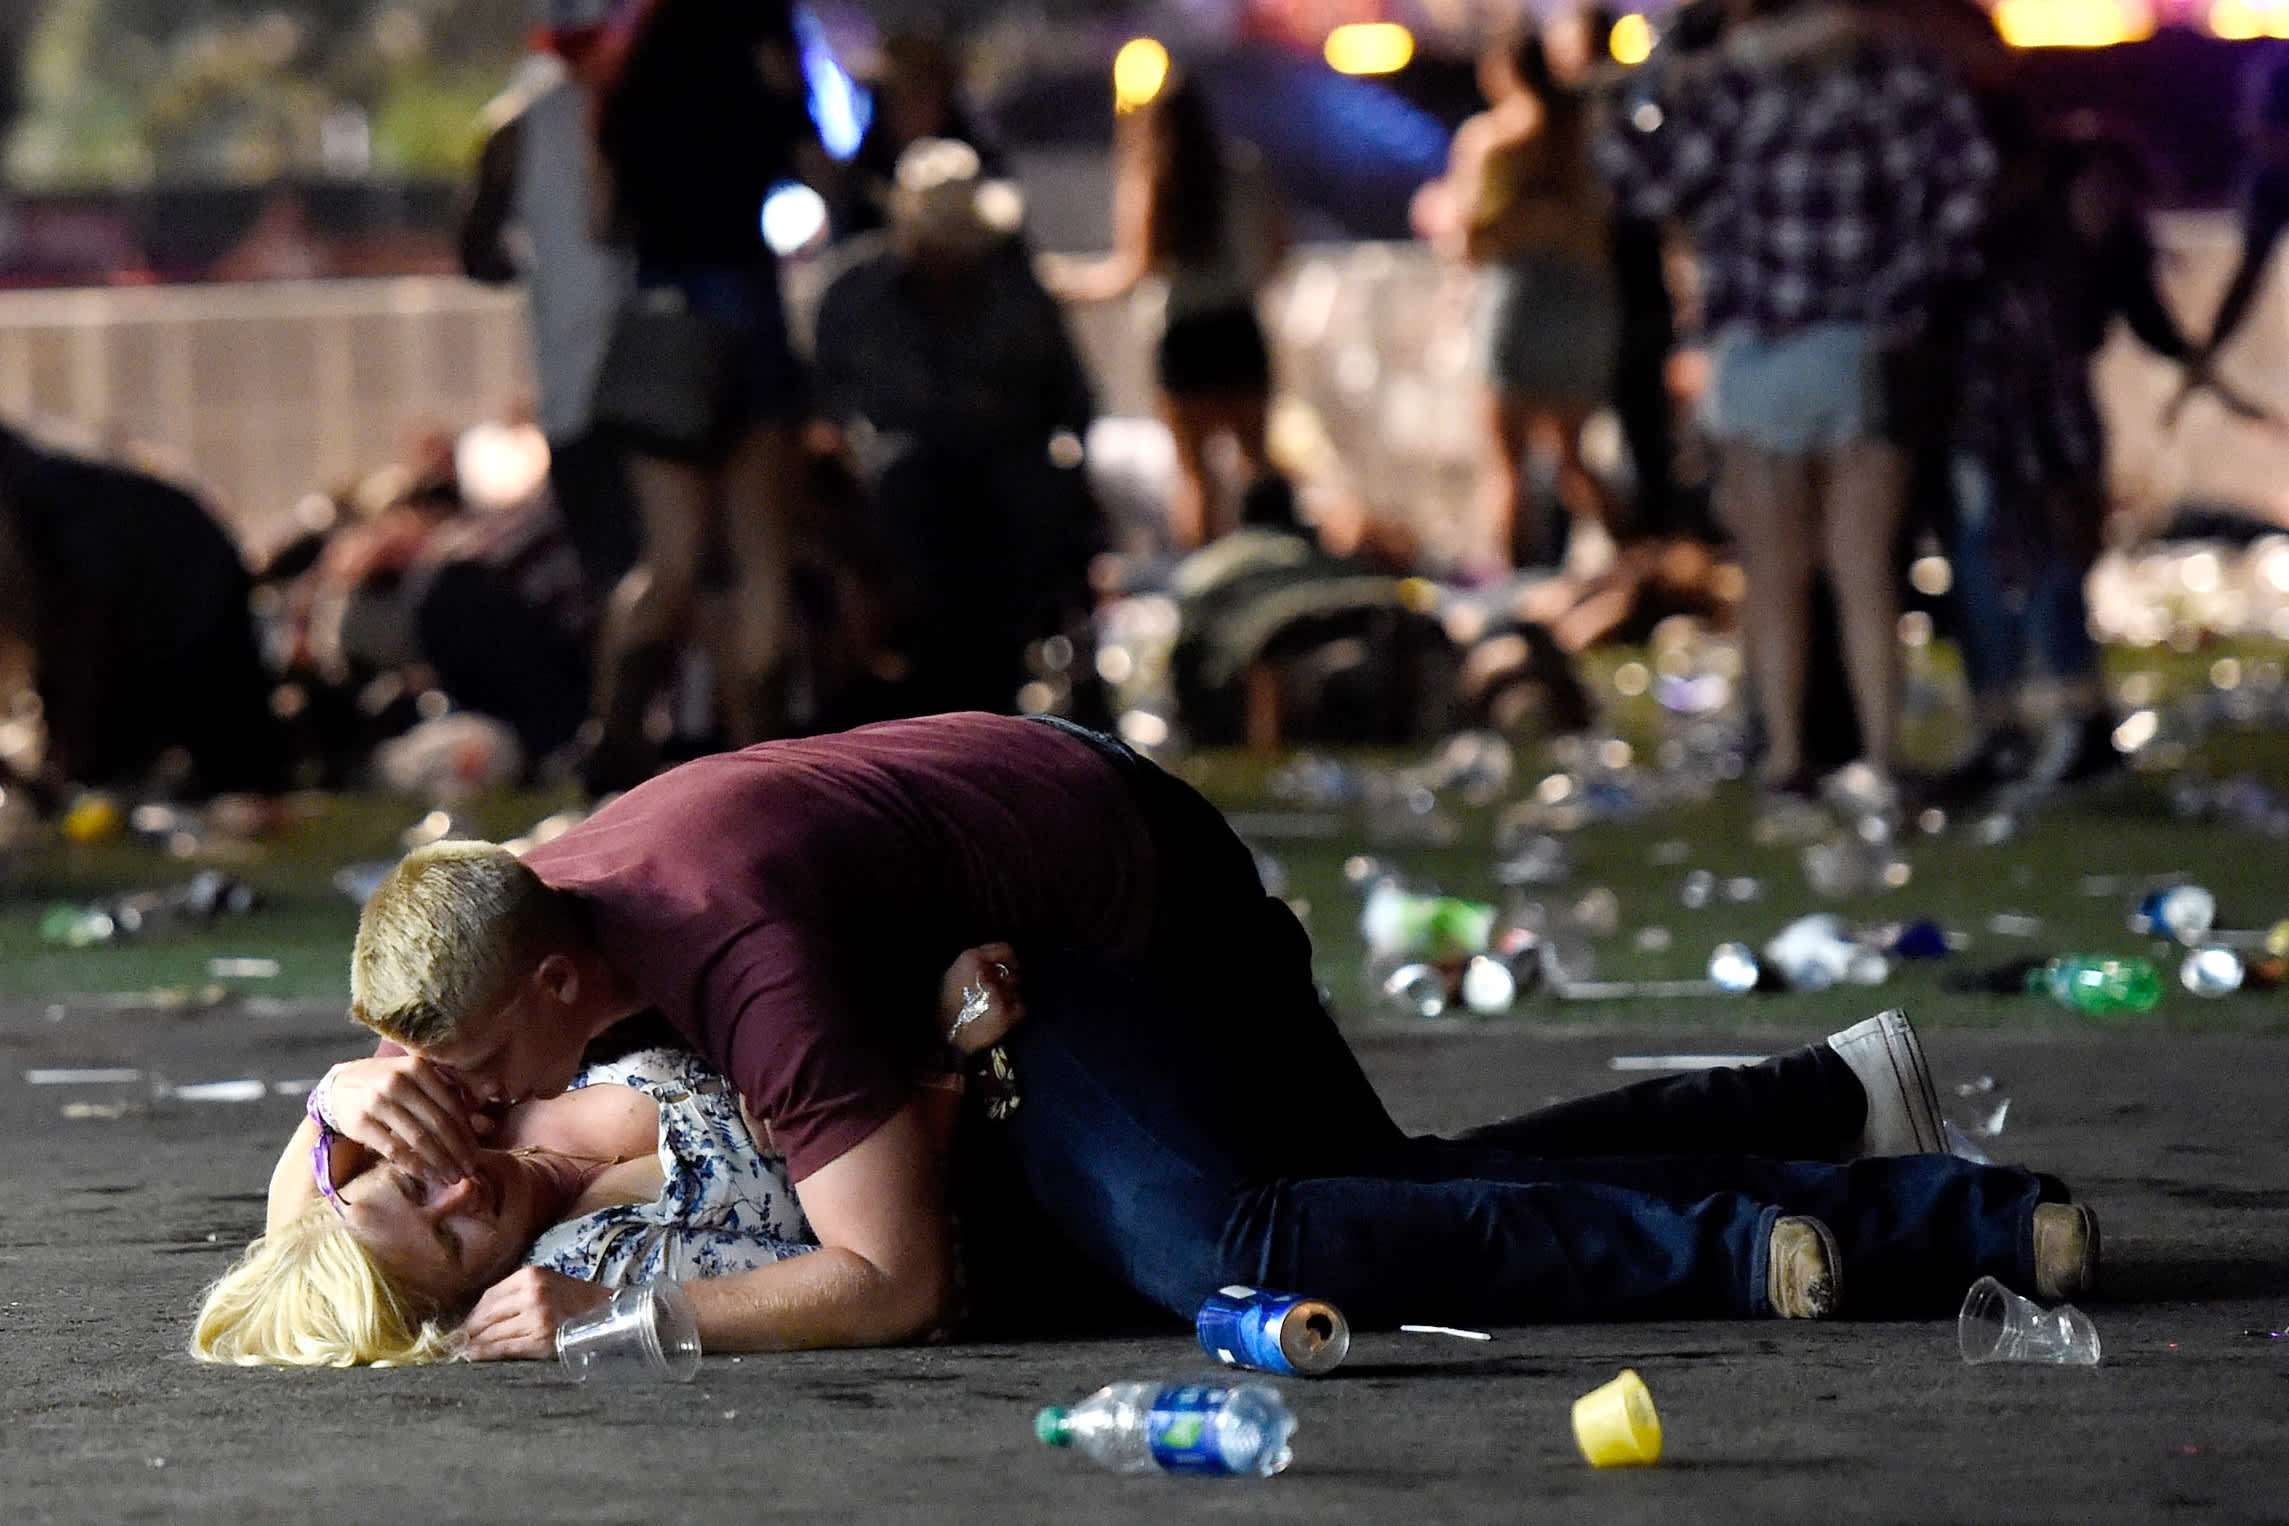 A man lays on top of a woman as people flee a mass shooting in Las Vegas, Nevada (DAVID BECKER / GETTY IMAGES / AFP)